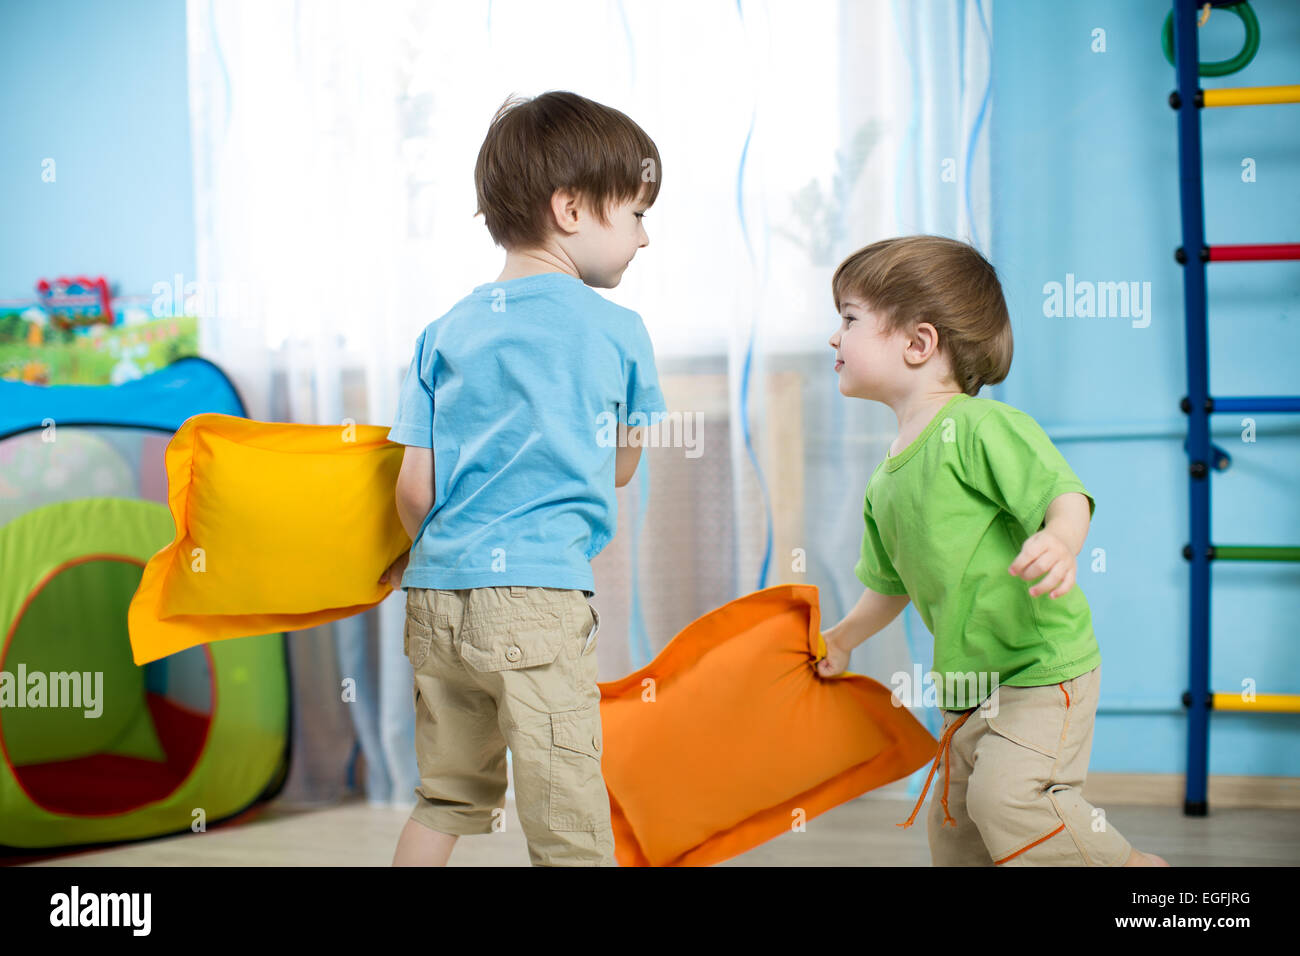 Two children playing with pillows Stock Photo